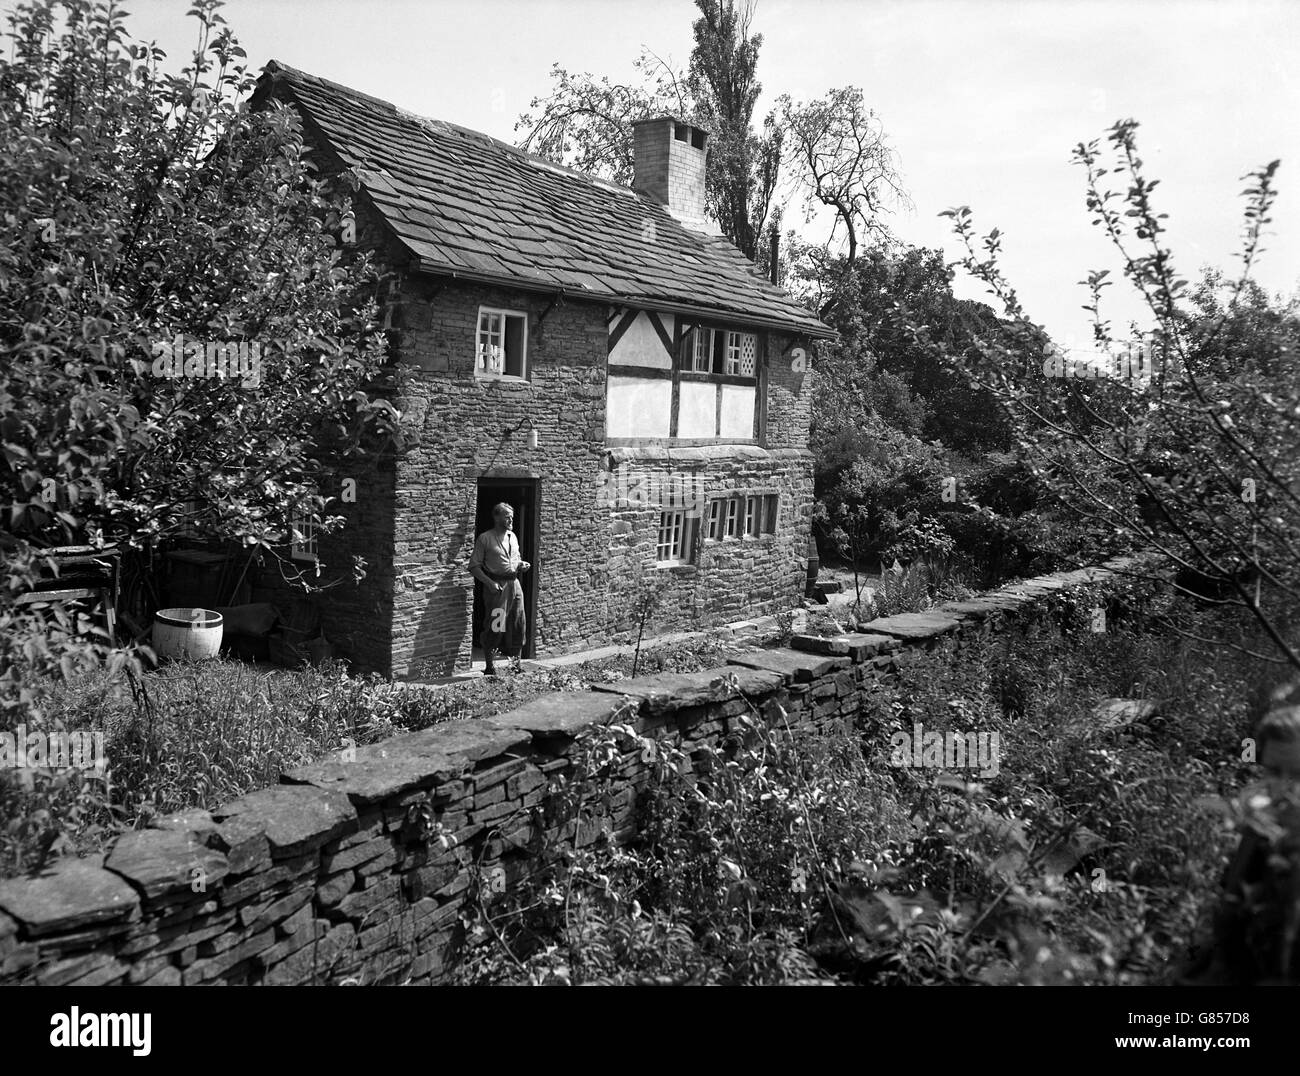 Alan C Browne stands at the door of his farm cottage, which has stood at Appley Bridge near Wigan for over 450 years. Archaeologists say it is one of the earliest and best preserved examples of a Tudor cottage in the county. Stock Photo